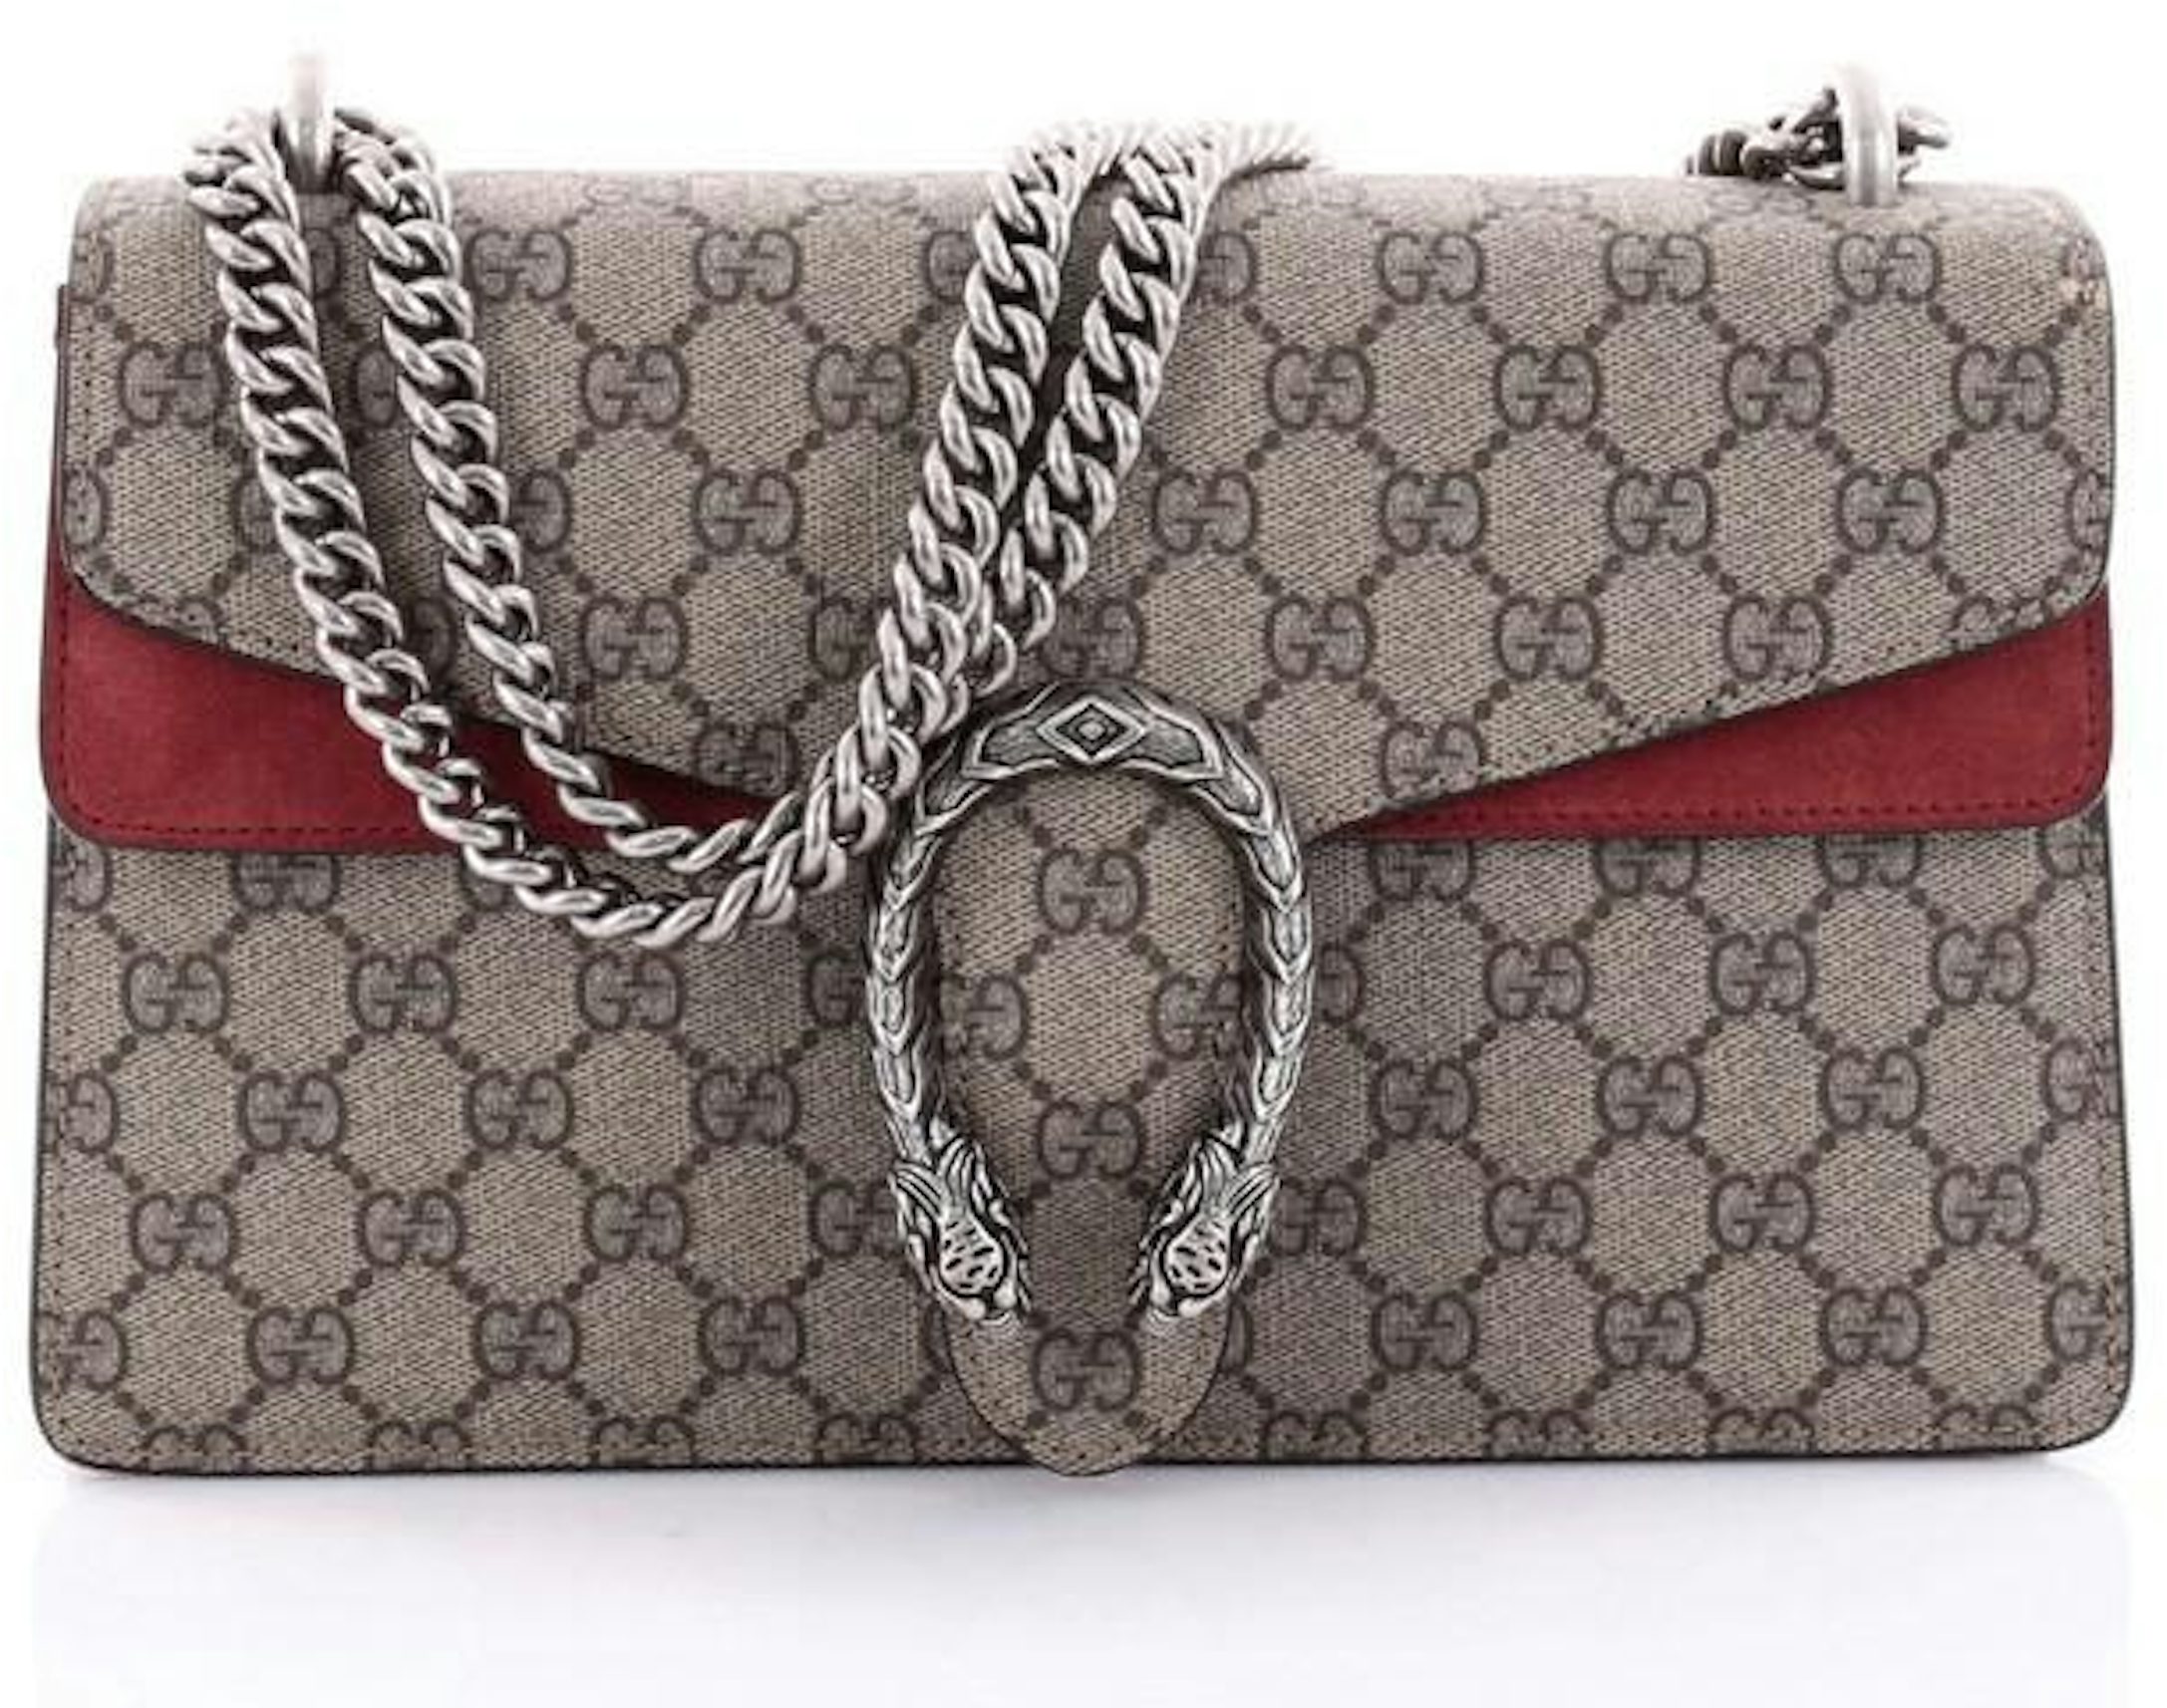 GUCCI Dionysus mini printed coated-canvas and suede shoulder bag